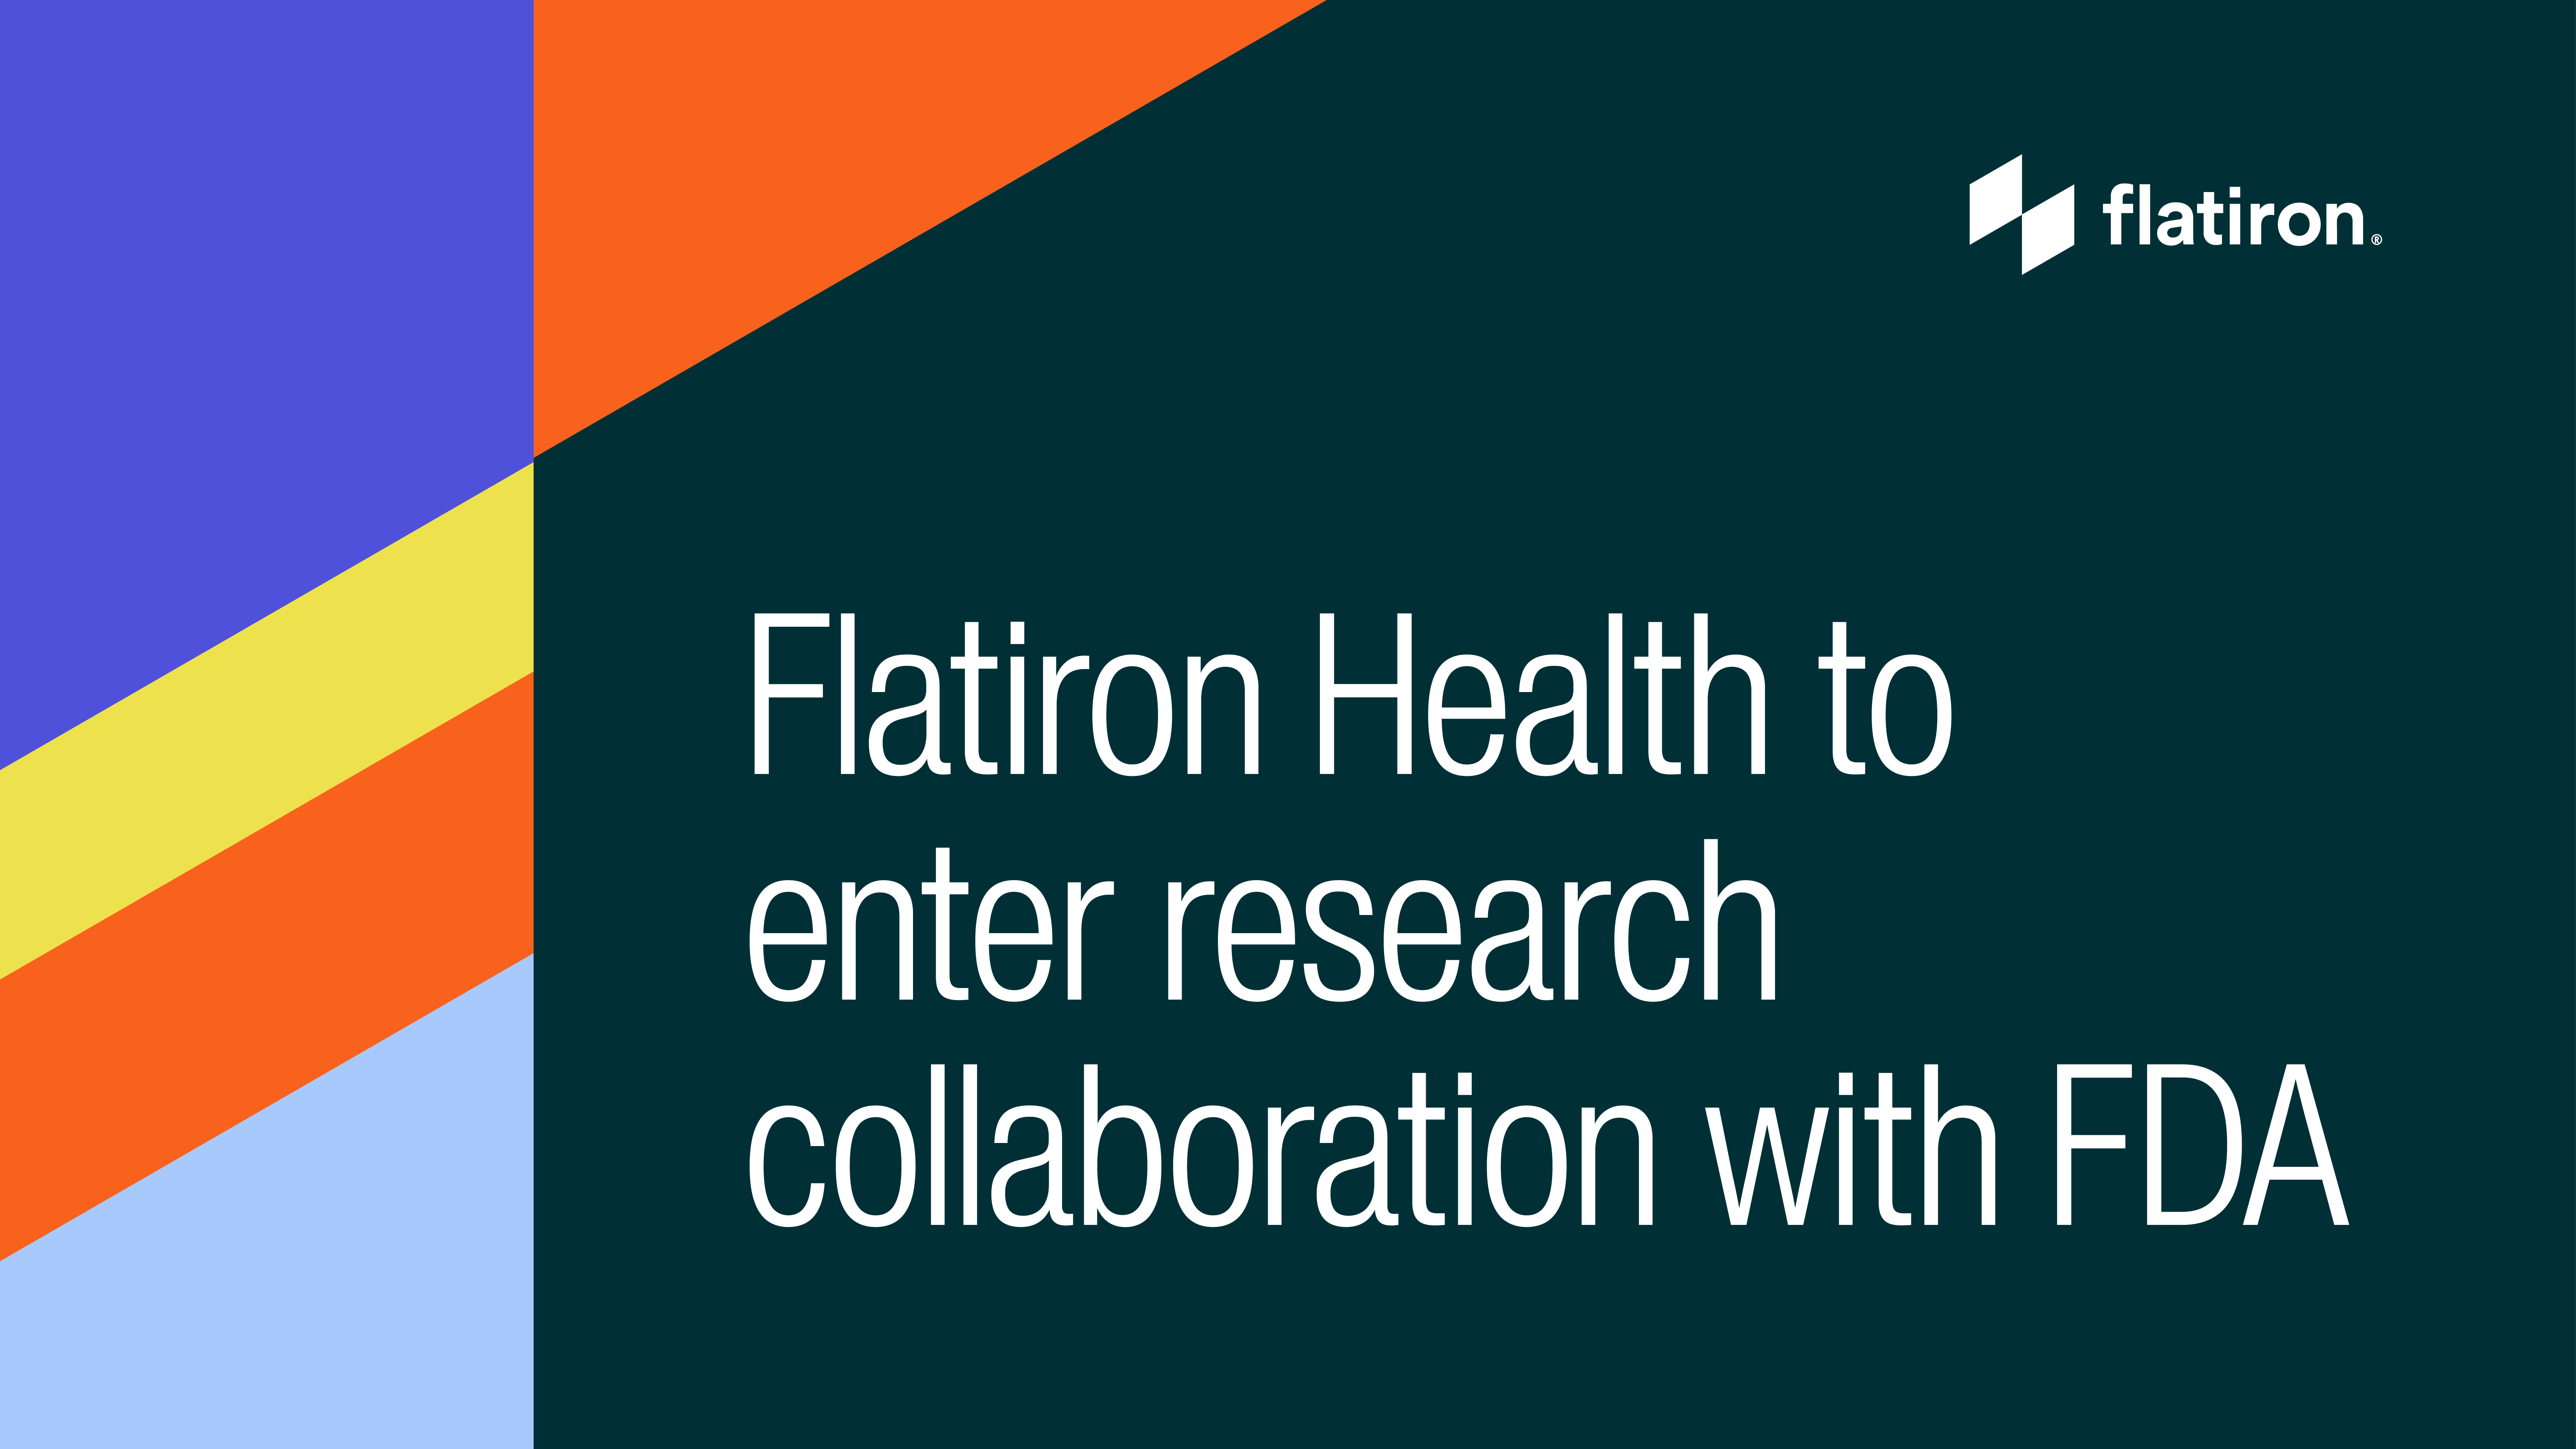 Flatiron Health enters new five-year research collaboration with FDA on real-world data